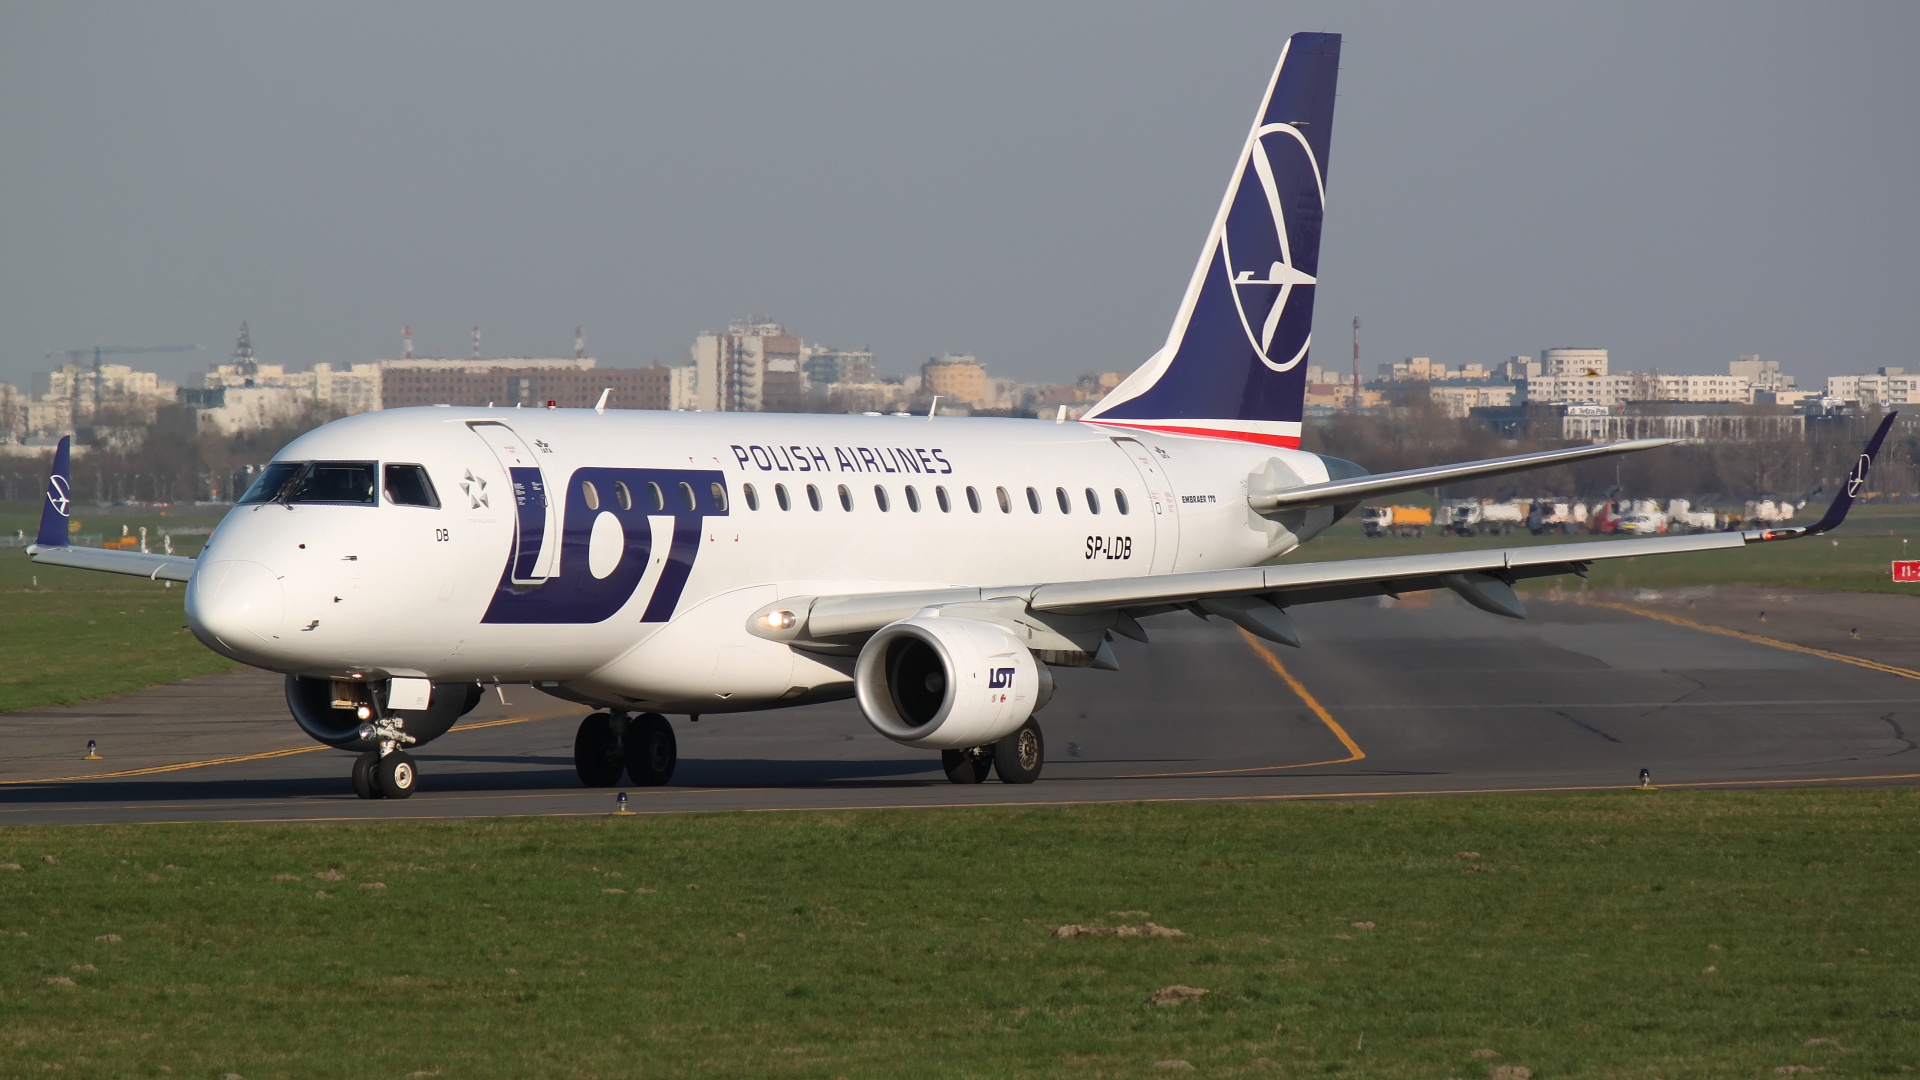 SP-LDB (new livery) (Aircraft » EPWA Spotting » Embraer E170 » LOT Polish Airlines)